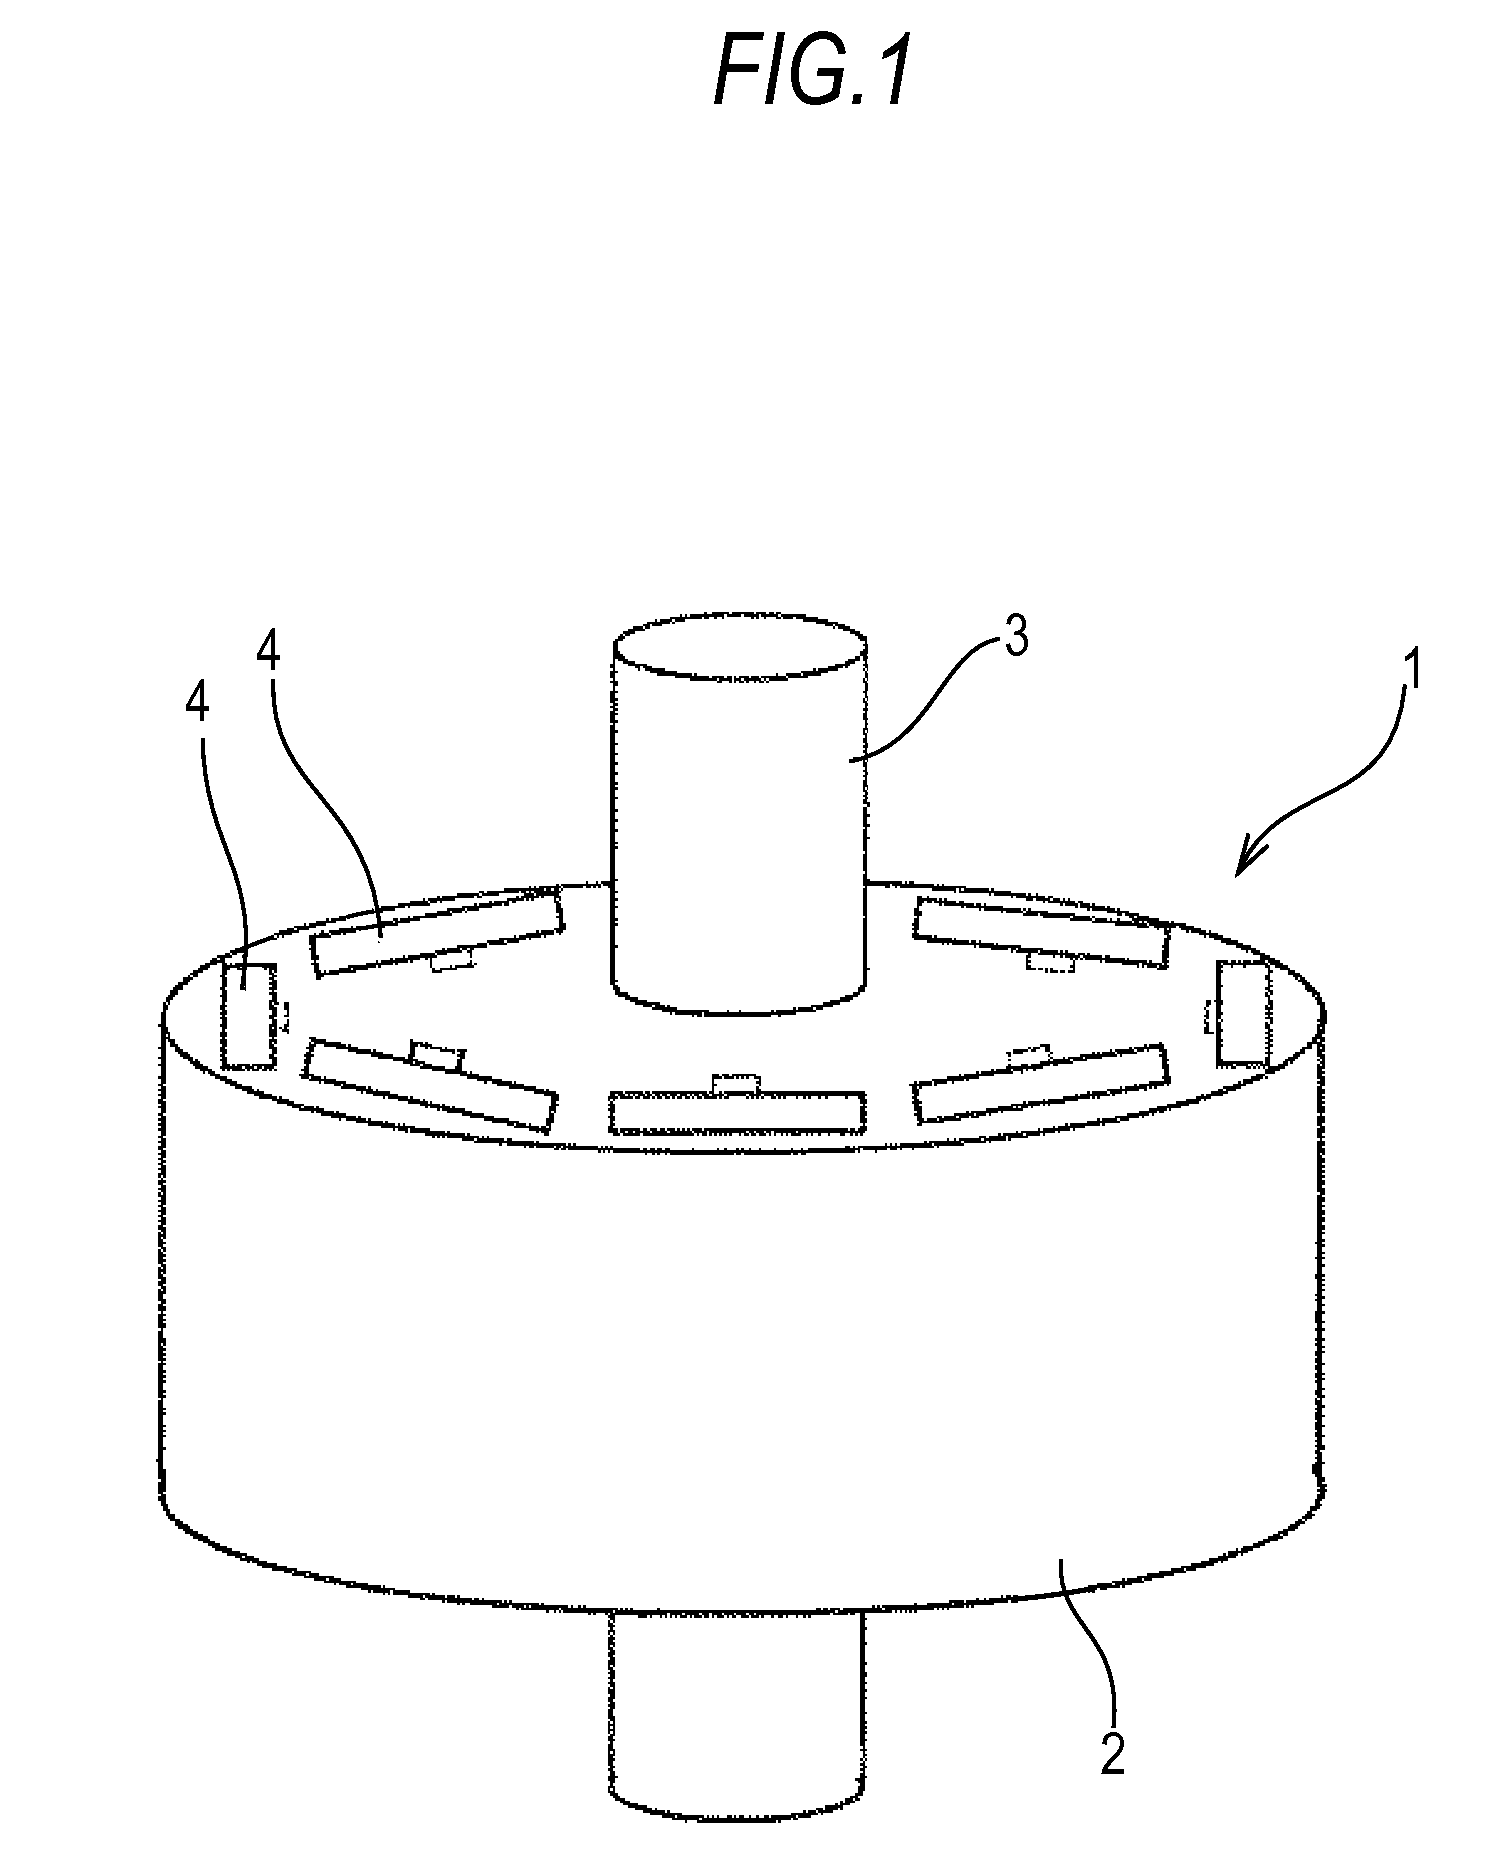 Permanent magnet rotor